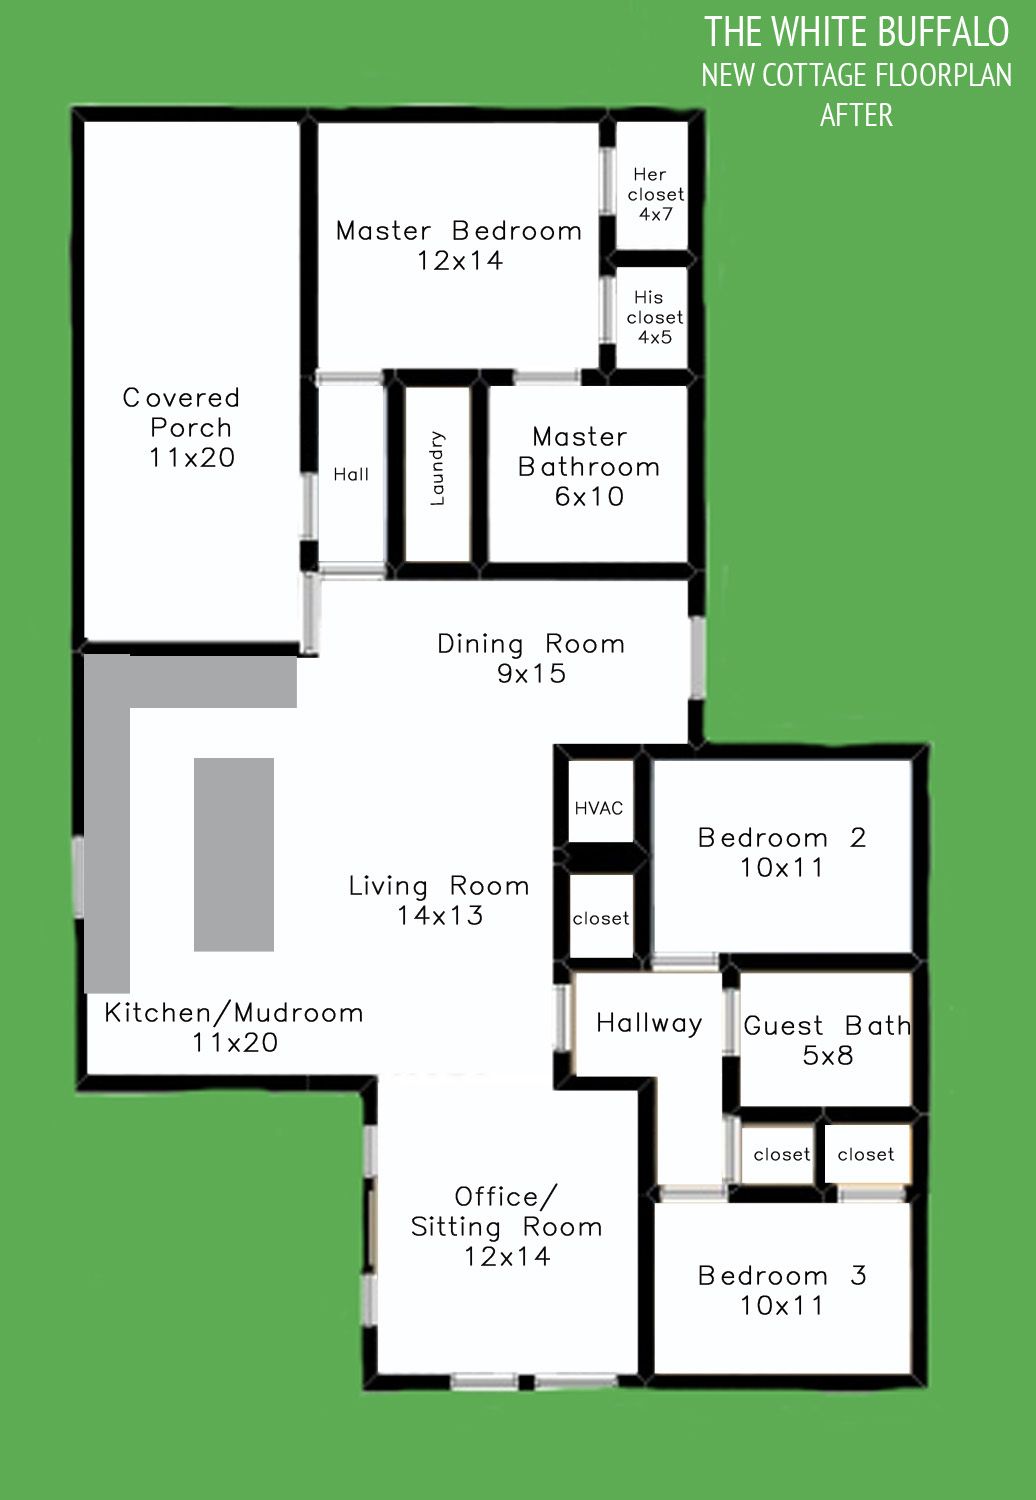 His and Hers Closets Floor plans, Cottage, Guest bath